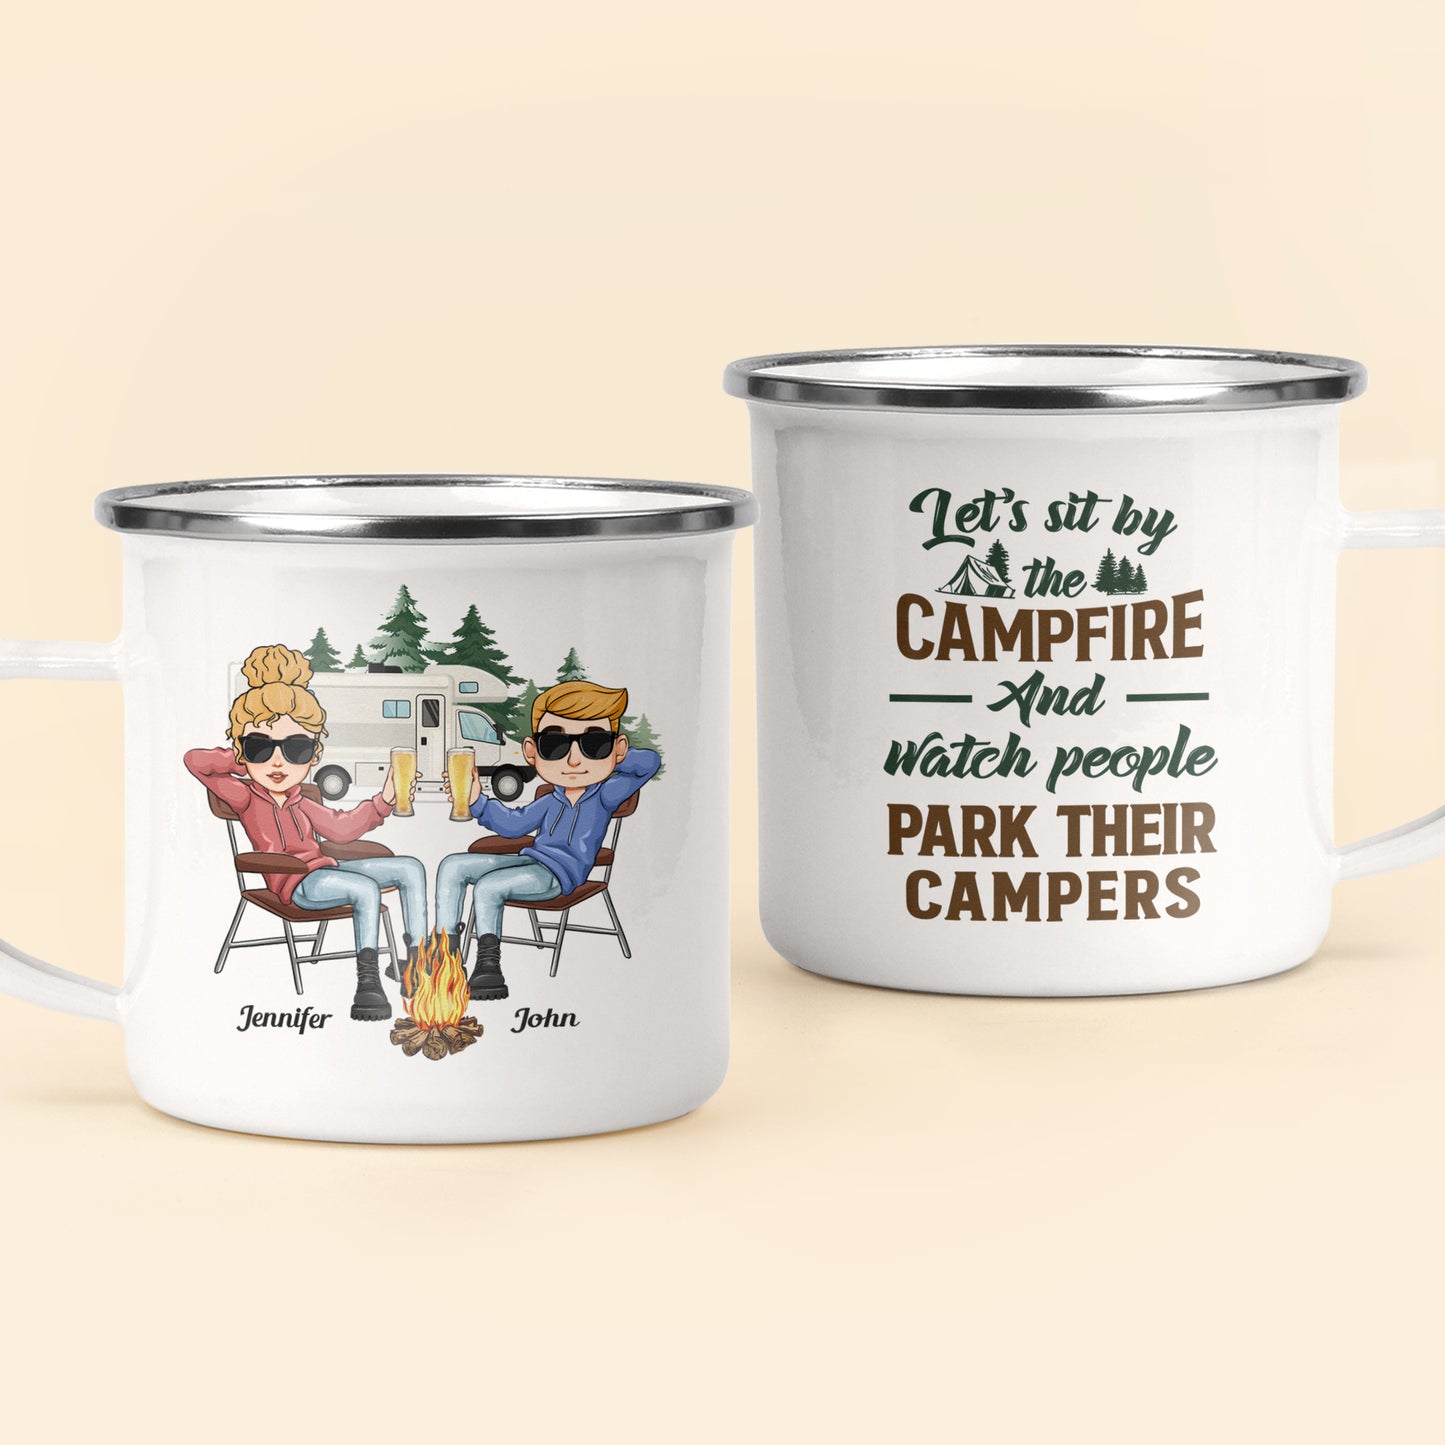 Making Memories One Campsite At A Time - Personalized Enamel Mug - Birthday Gift For Camping Friends